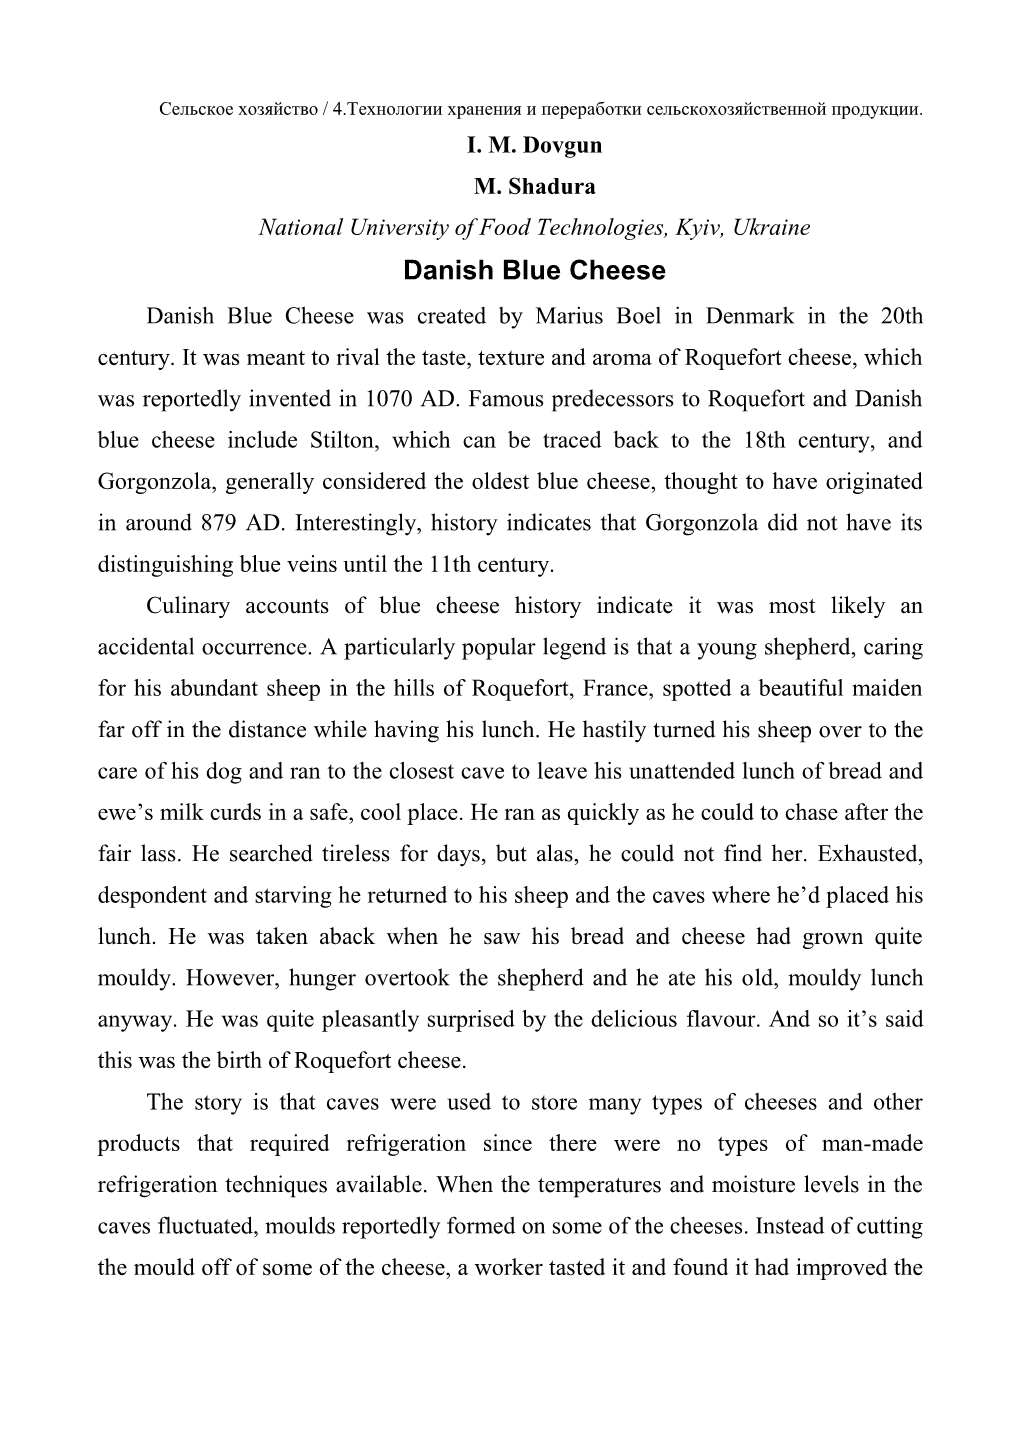 Danish Blue Cheese Danish Blue Cheese Was Created by Marius Boel in Denmark in the 20Th Century